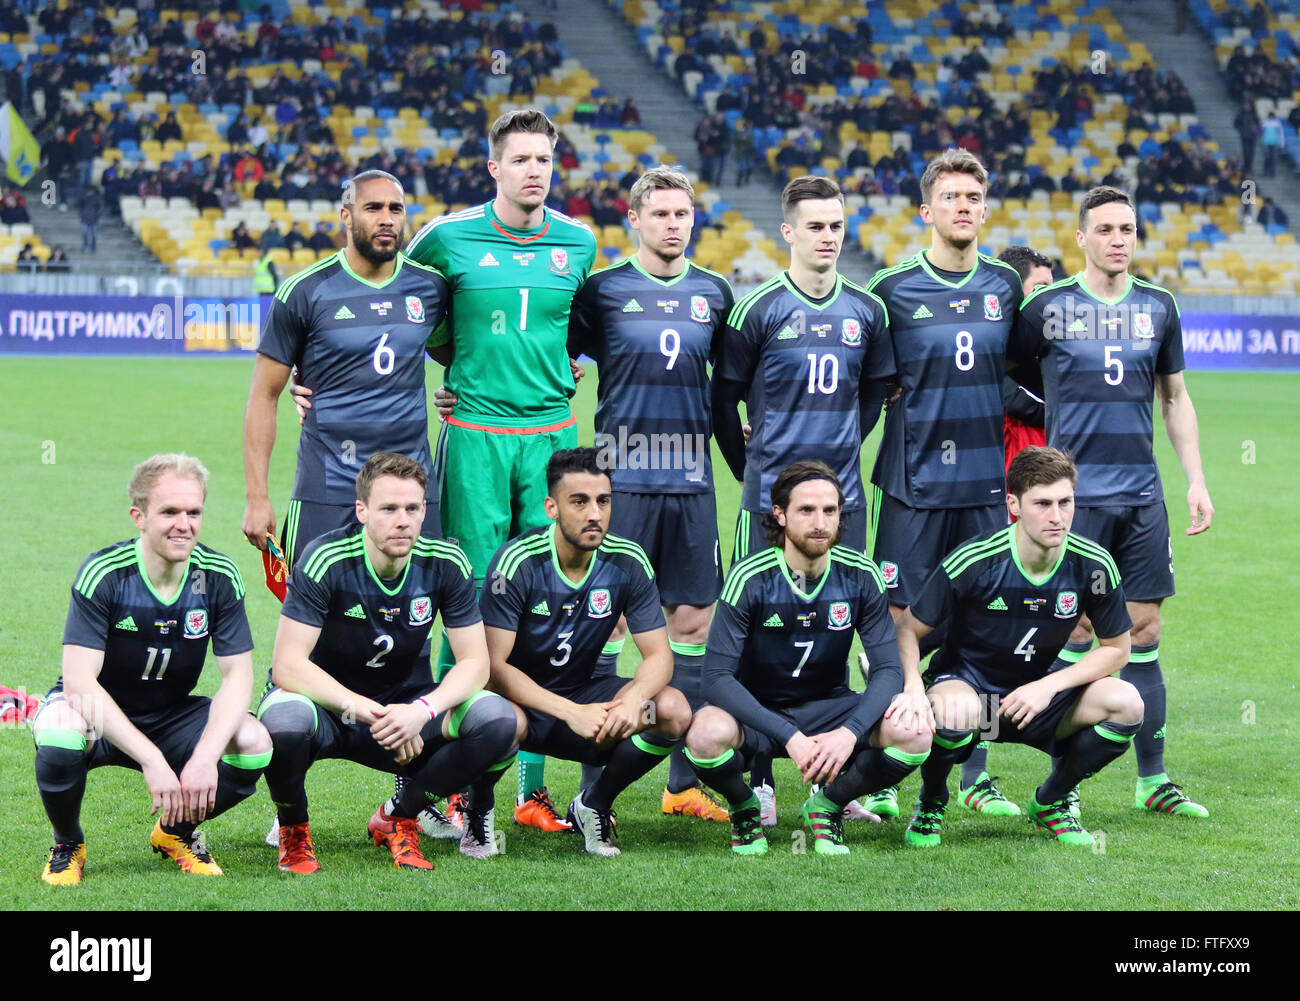 Kyiv, Ukraine. 28th March, 2016. Players of Wales National Team pose for a group photo before the Friendly match against Ukraine at NSC Olympic stadium in Kyiv, Ukraine. Credit:  Oleksandr Prykhodko/Alamy Live News Stock Photo